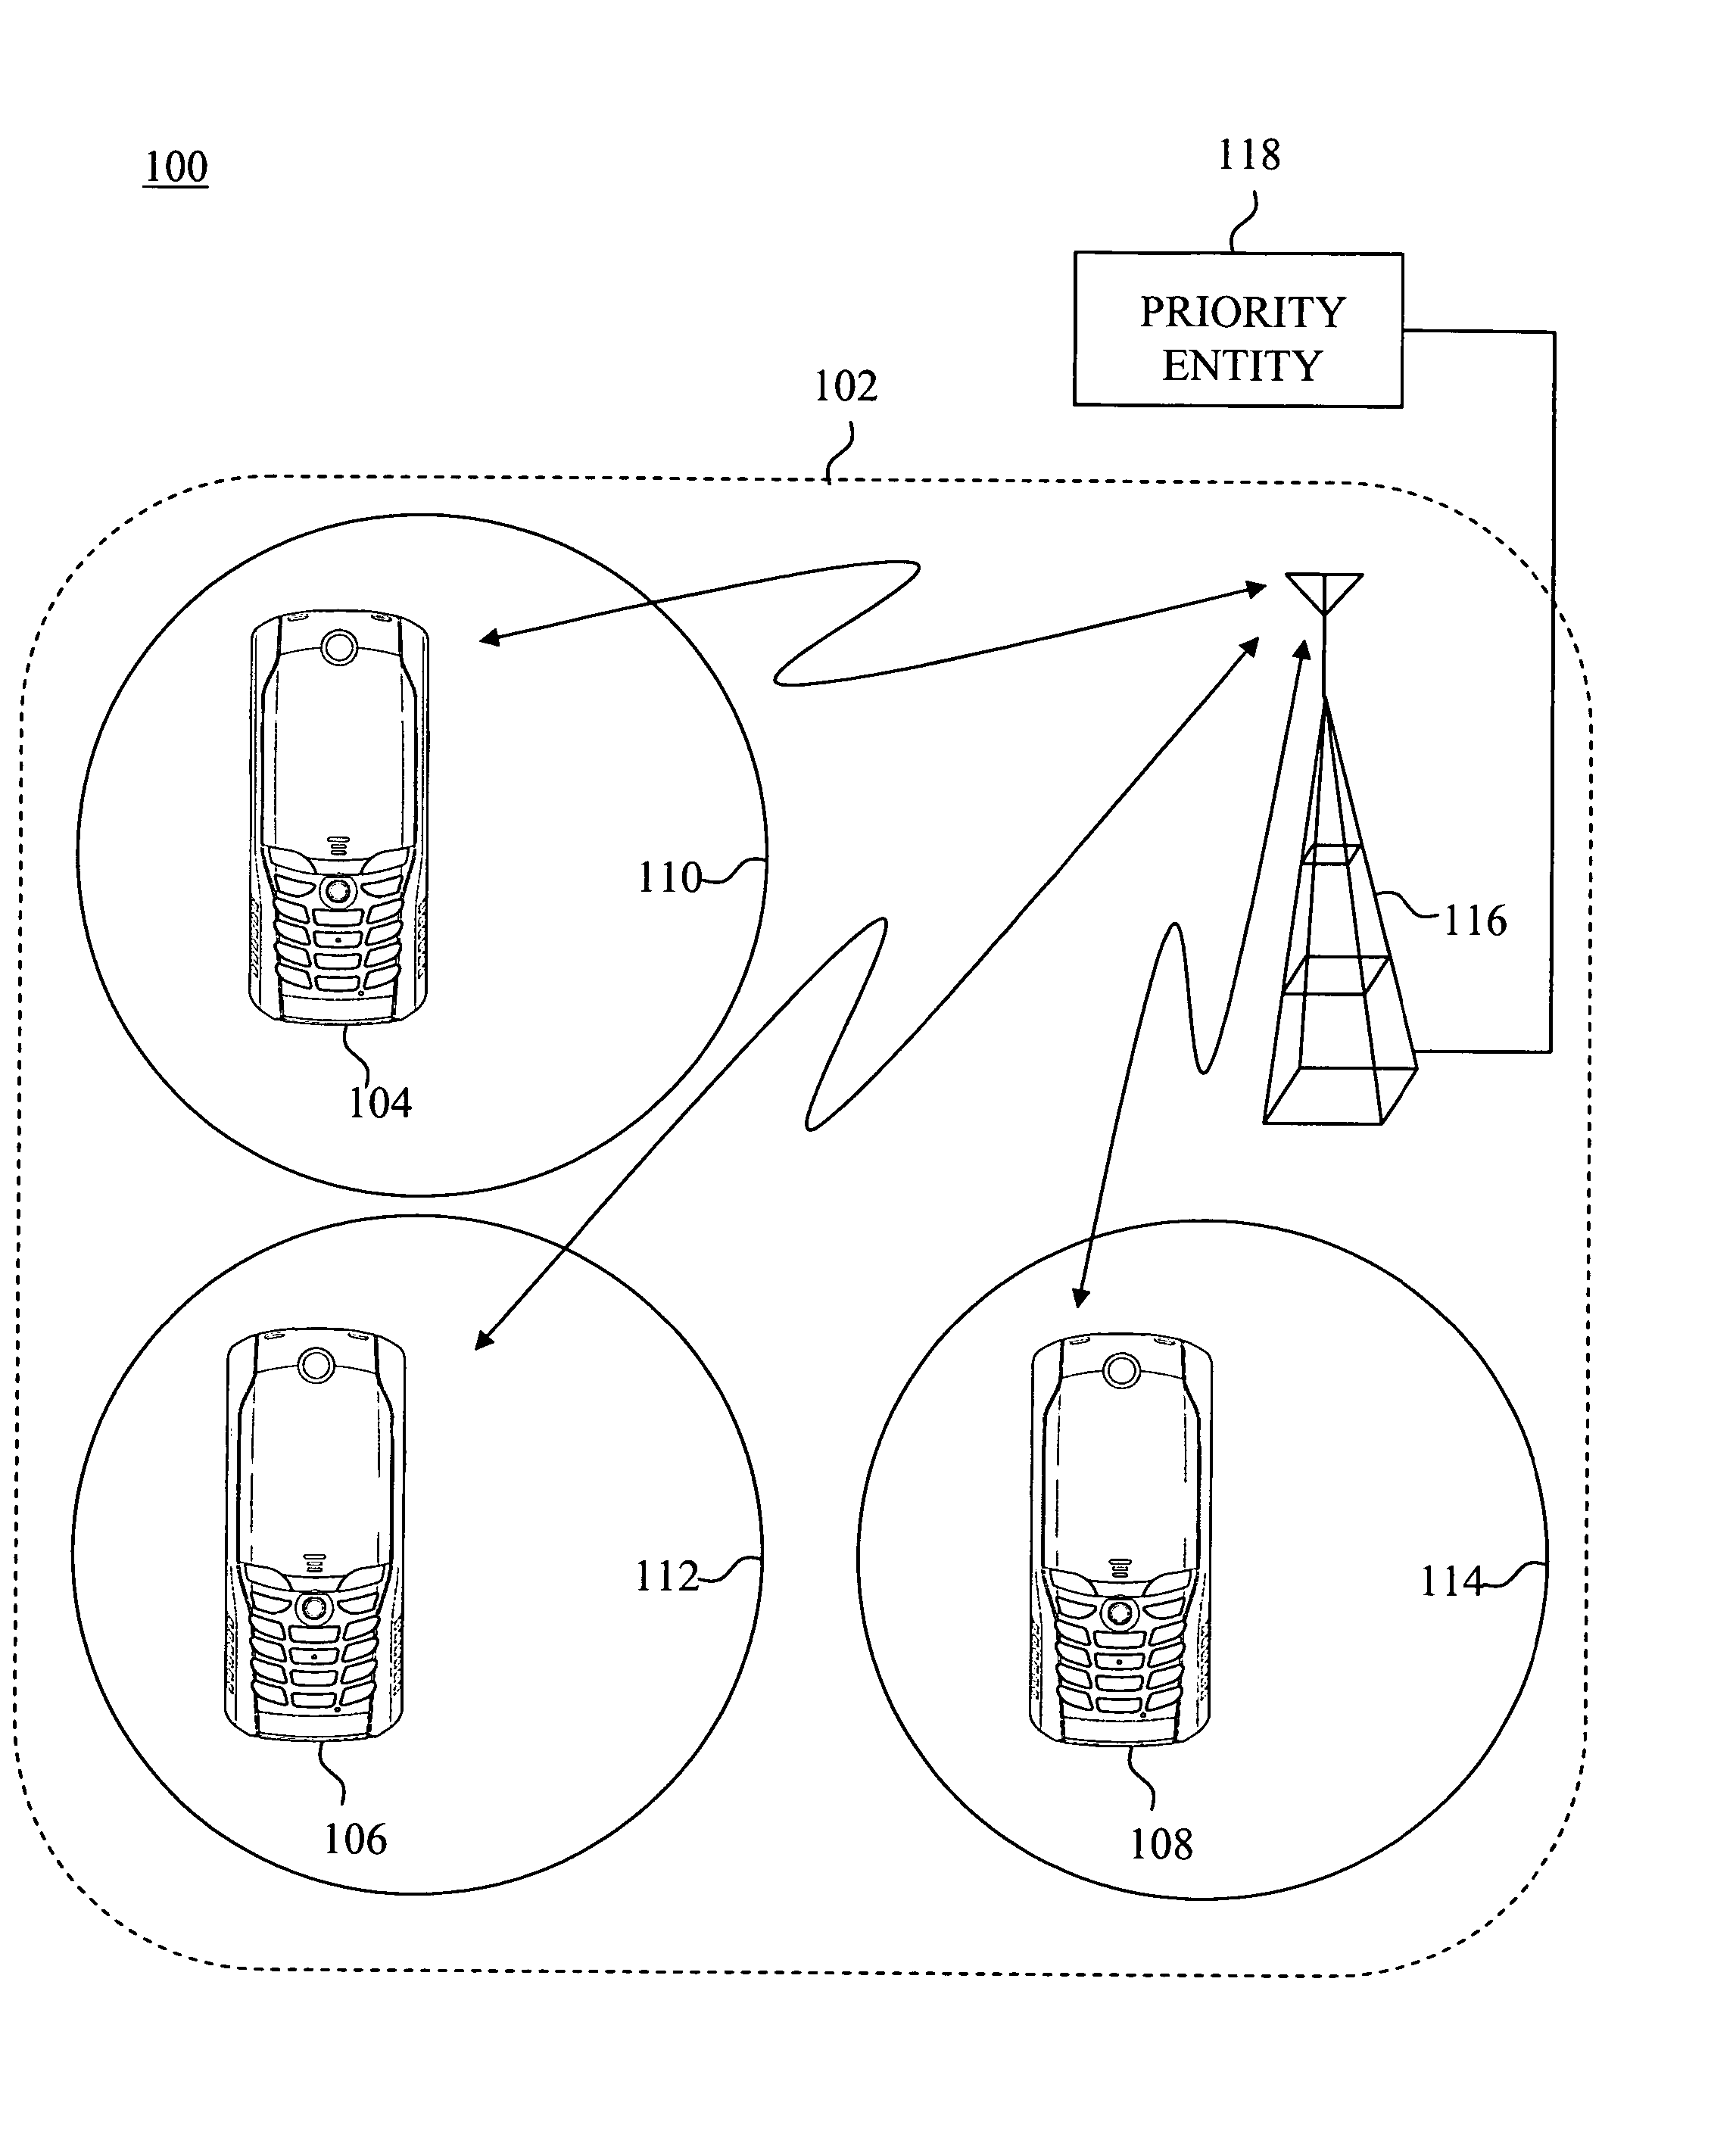 Broadcast message services for communication devices engaged in push-to-talk communication